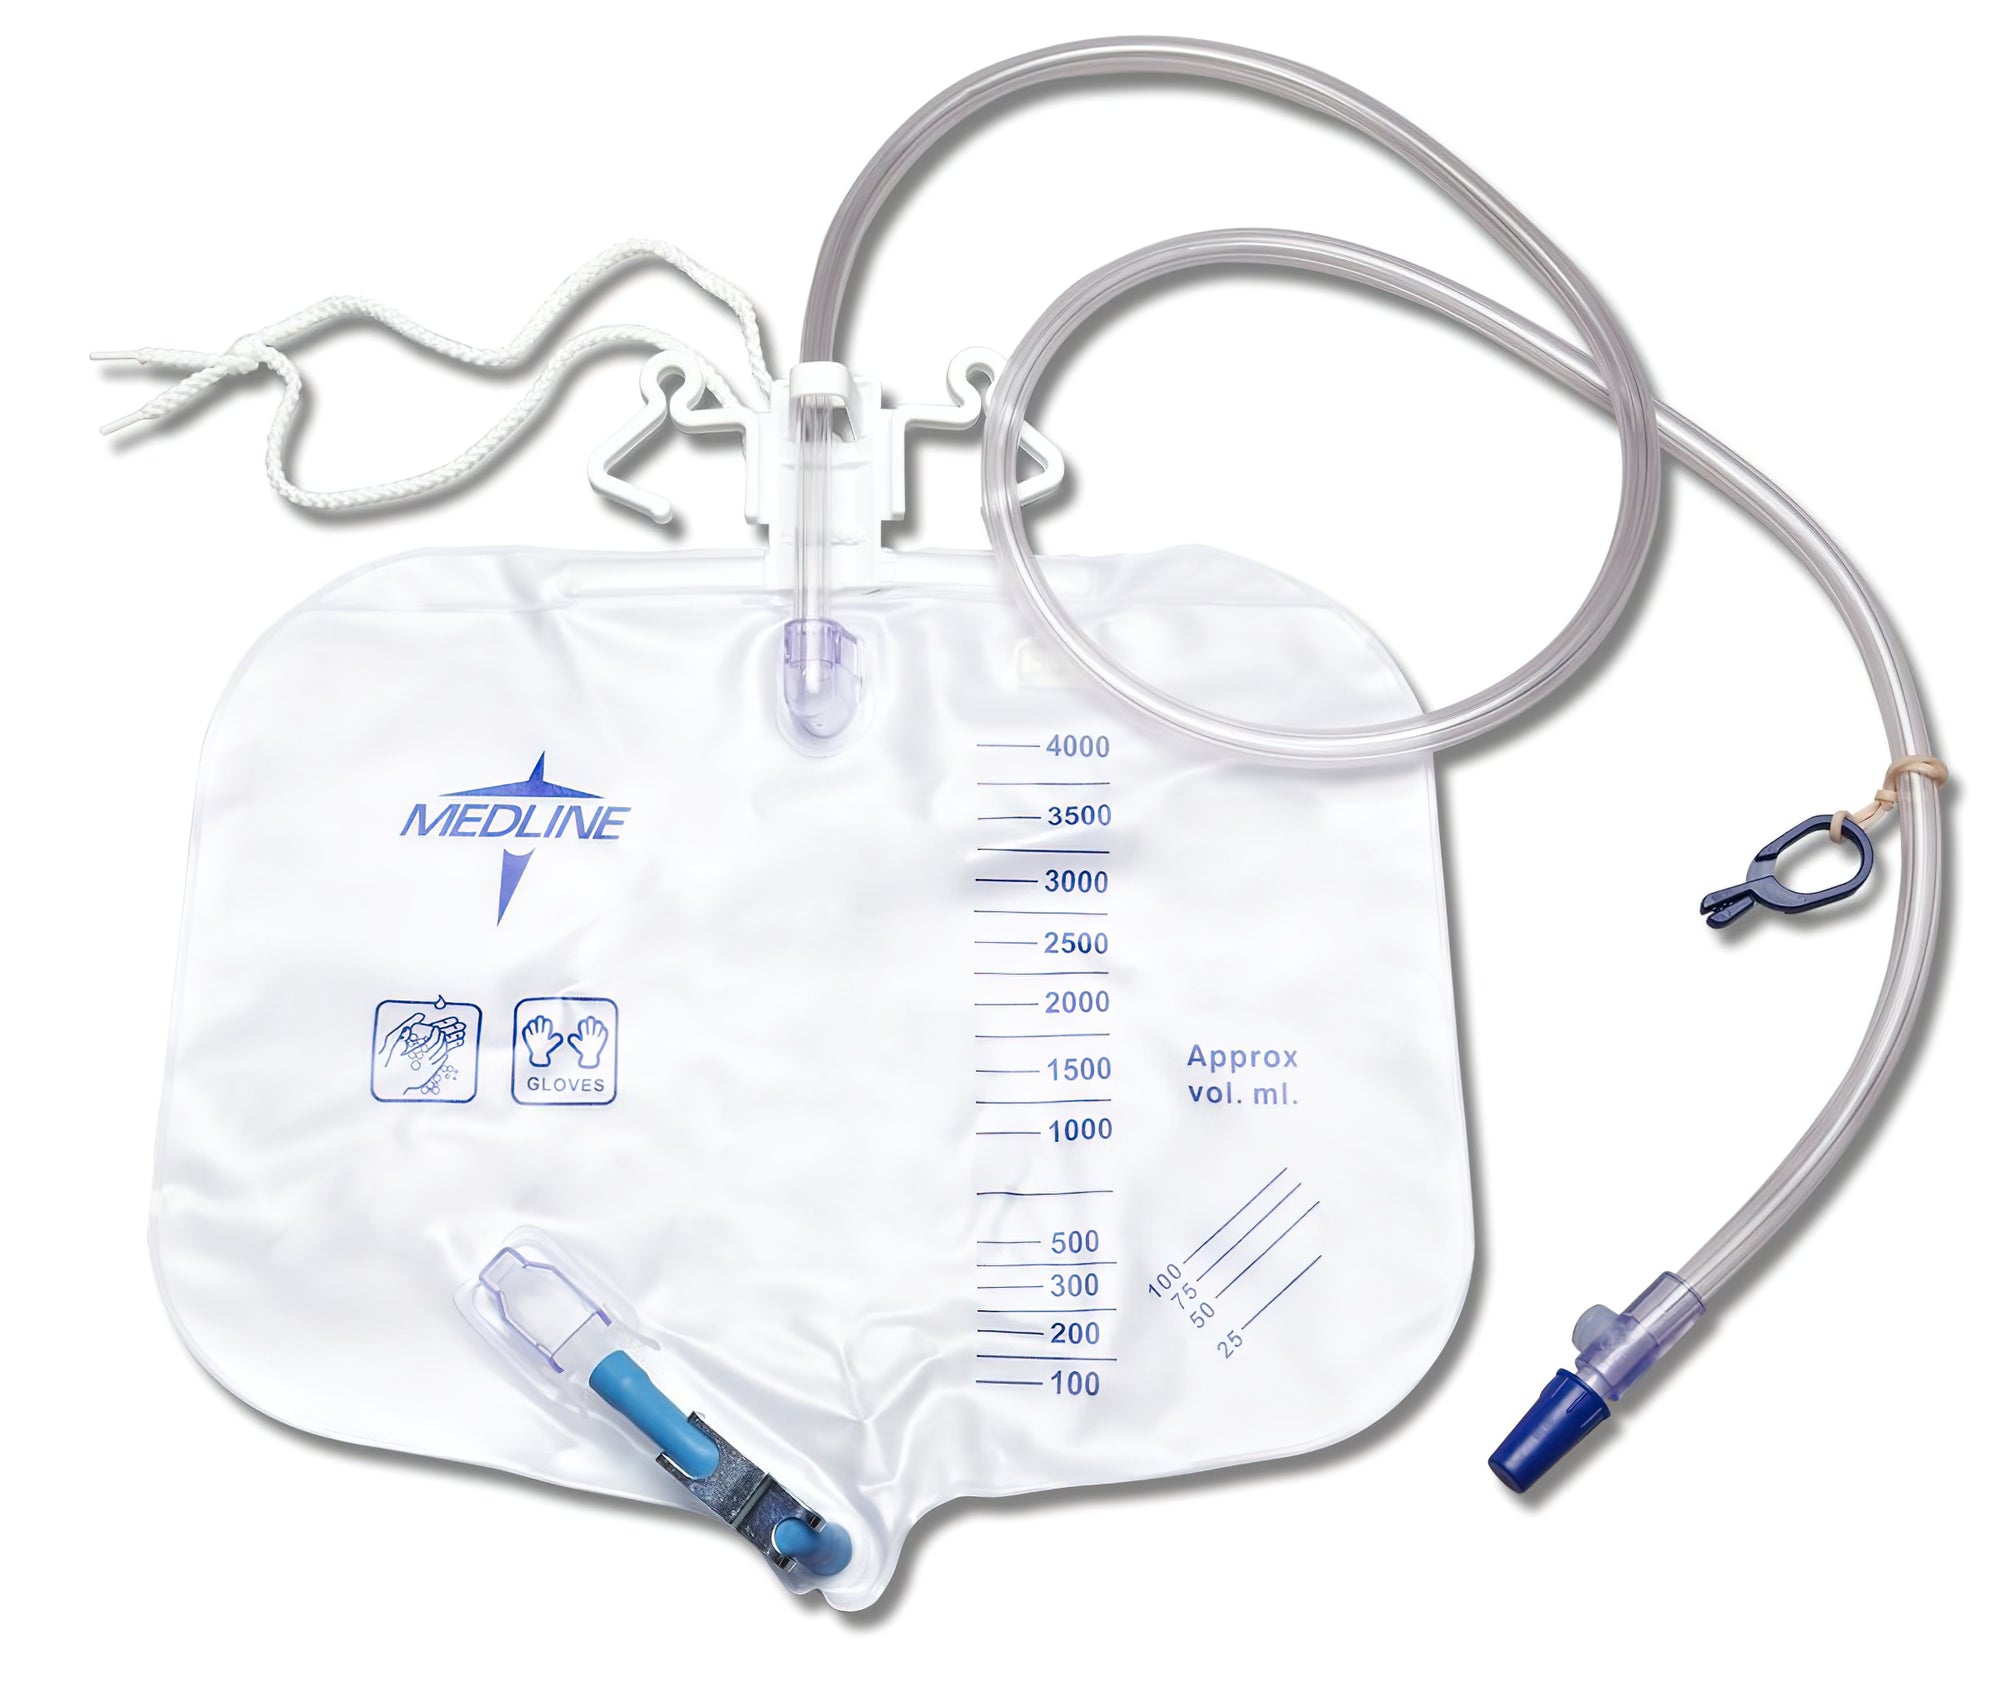 Dover 100% Silicone 2-Way Foley Catheter Tray, 16 Fr, 5 cc, with Secur –  Save Rite Medical